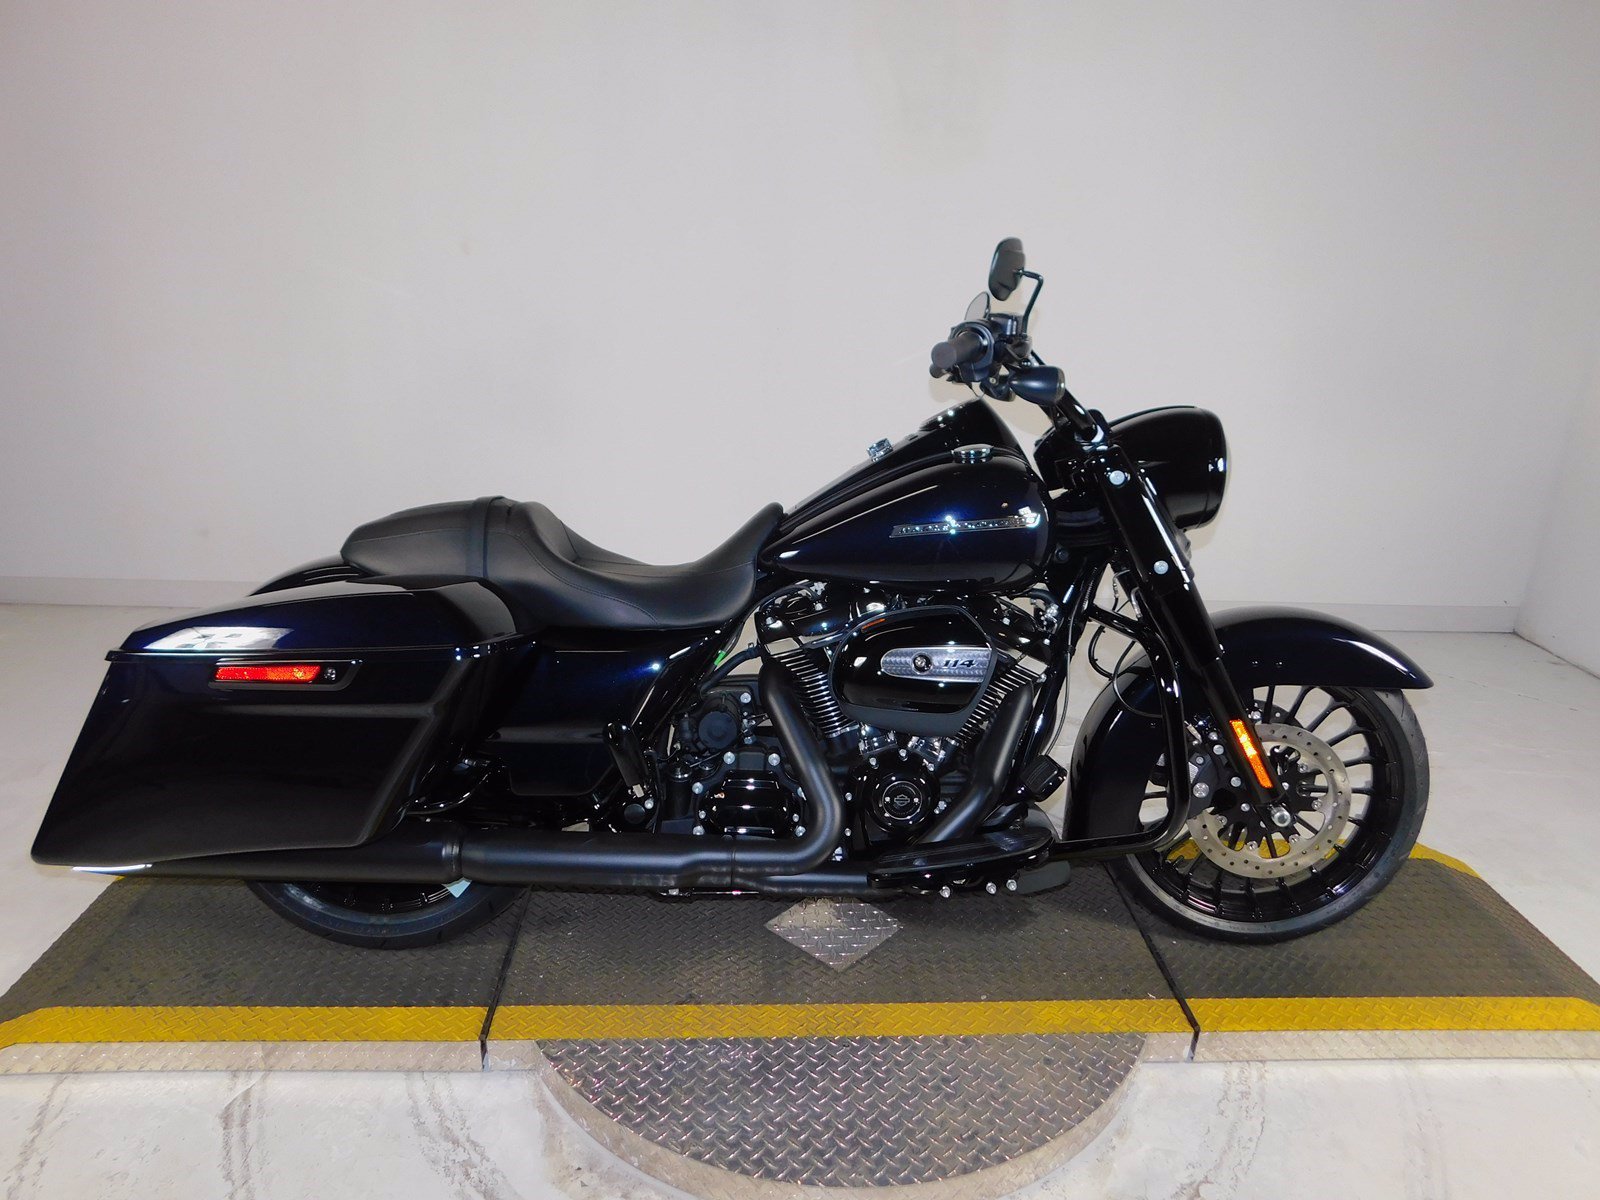 New 2019  Harley  Davidson  Road  King  Special  FLHRXS Touring 